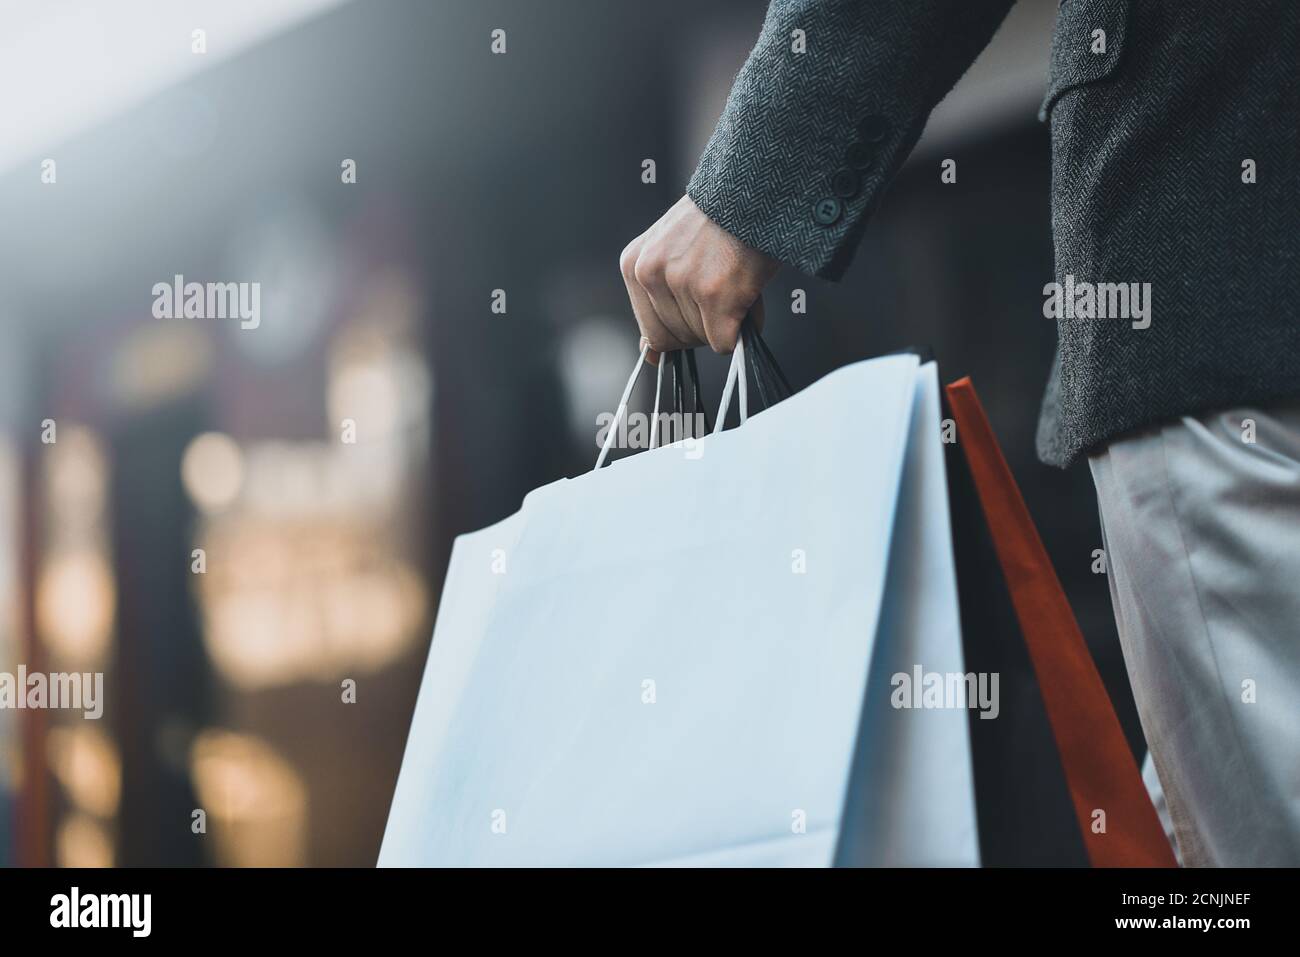 Concept of man shopping and holding bags, closeup images. Close up of paper shopping bags in male hand. Stock Photo